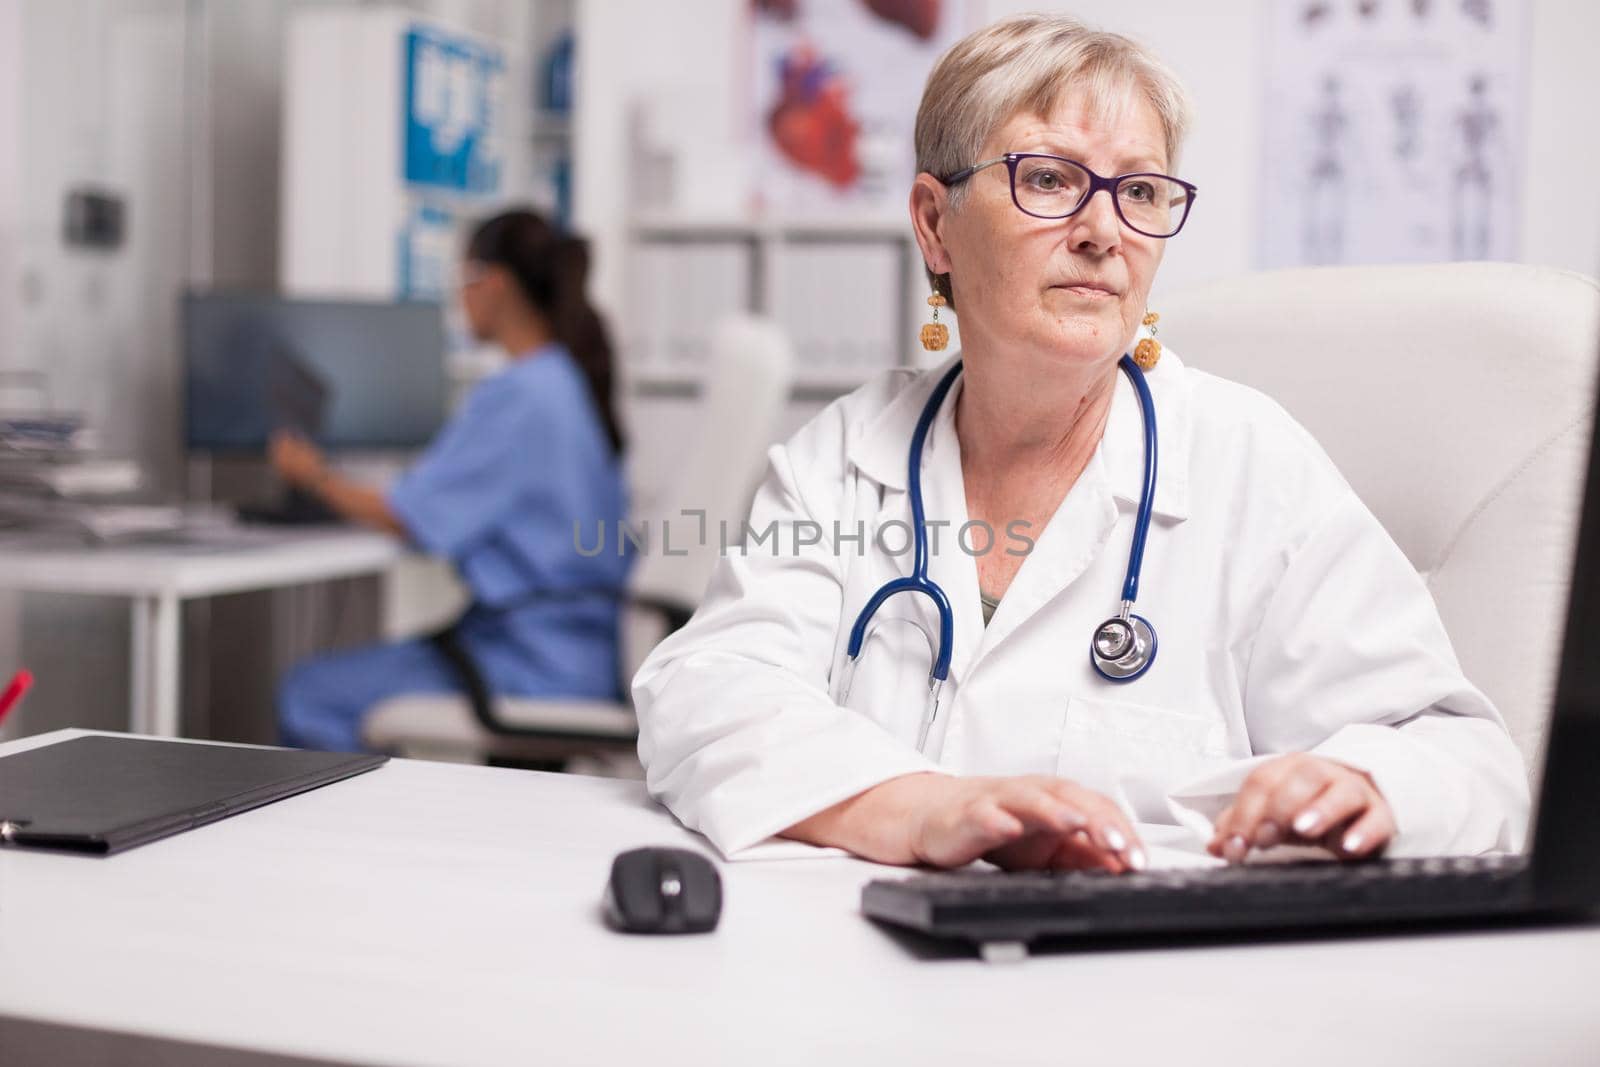 Portrait of experienced senior medic typing report on computer and nurse holding x-ray in the background.